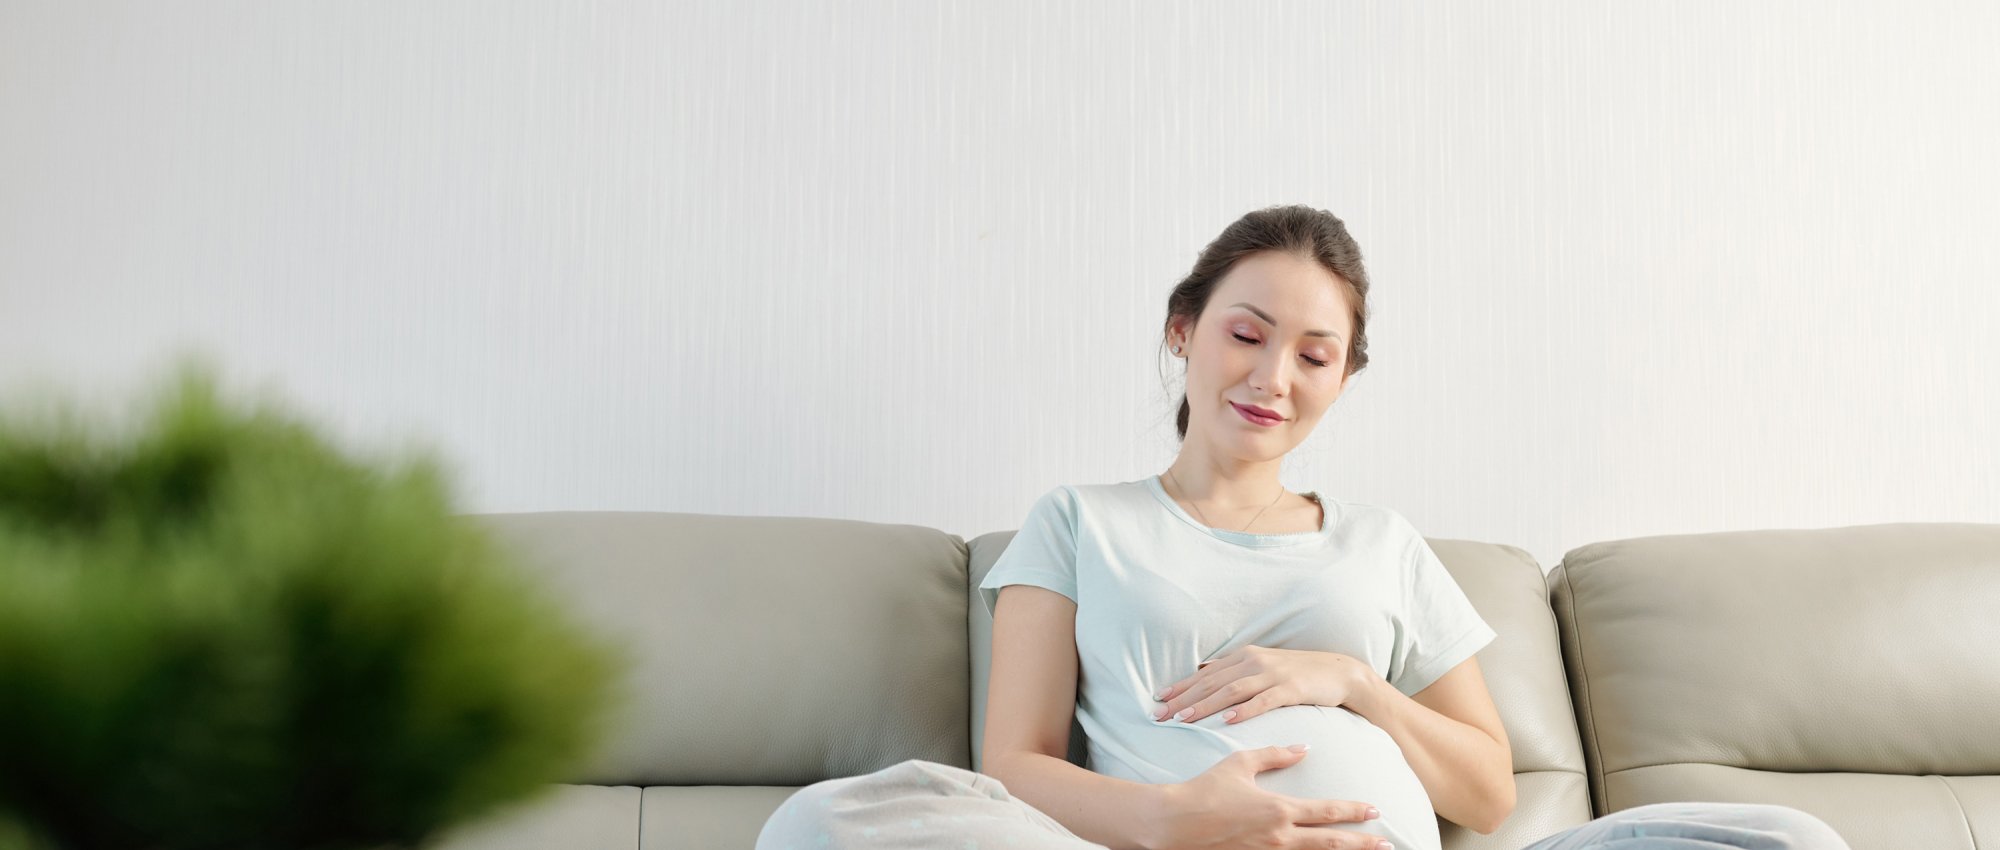 Pregnant woman using hypnobirthing techniques to relax